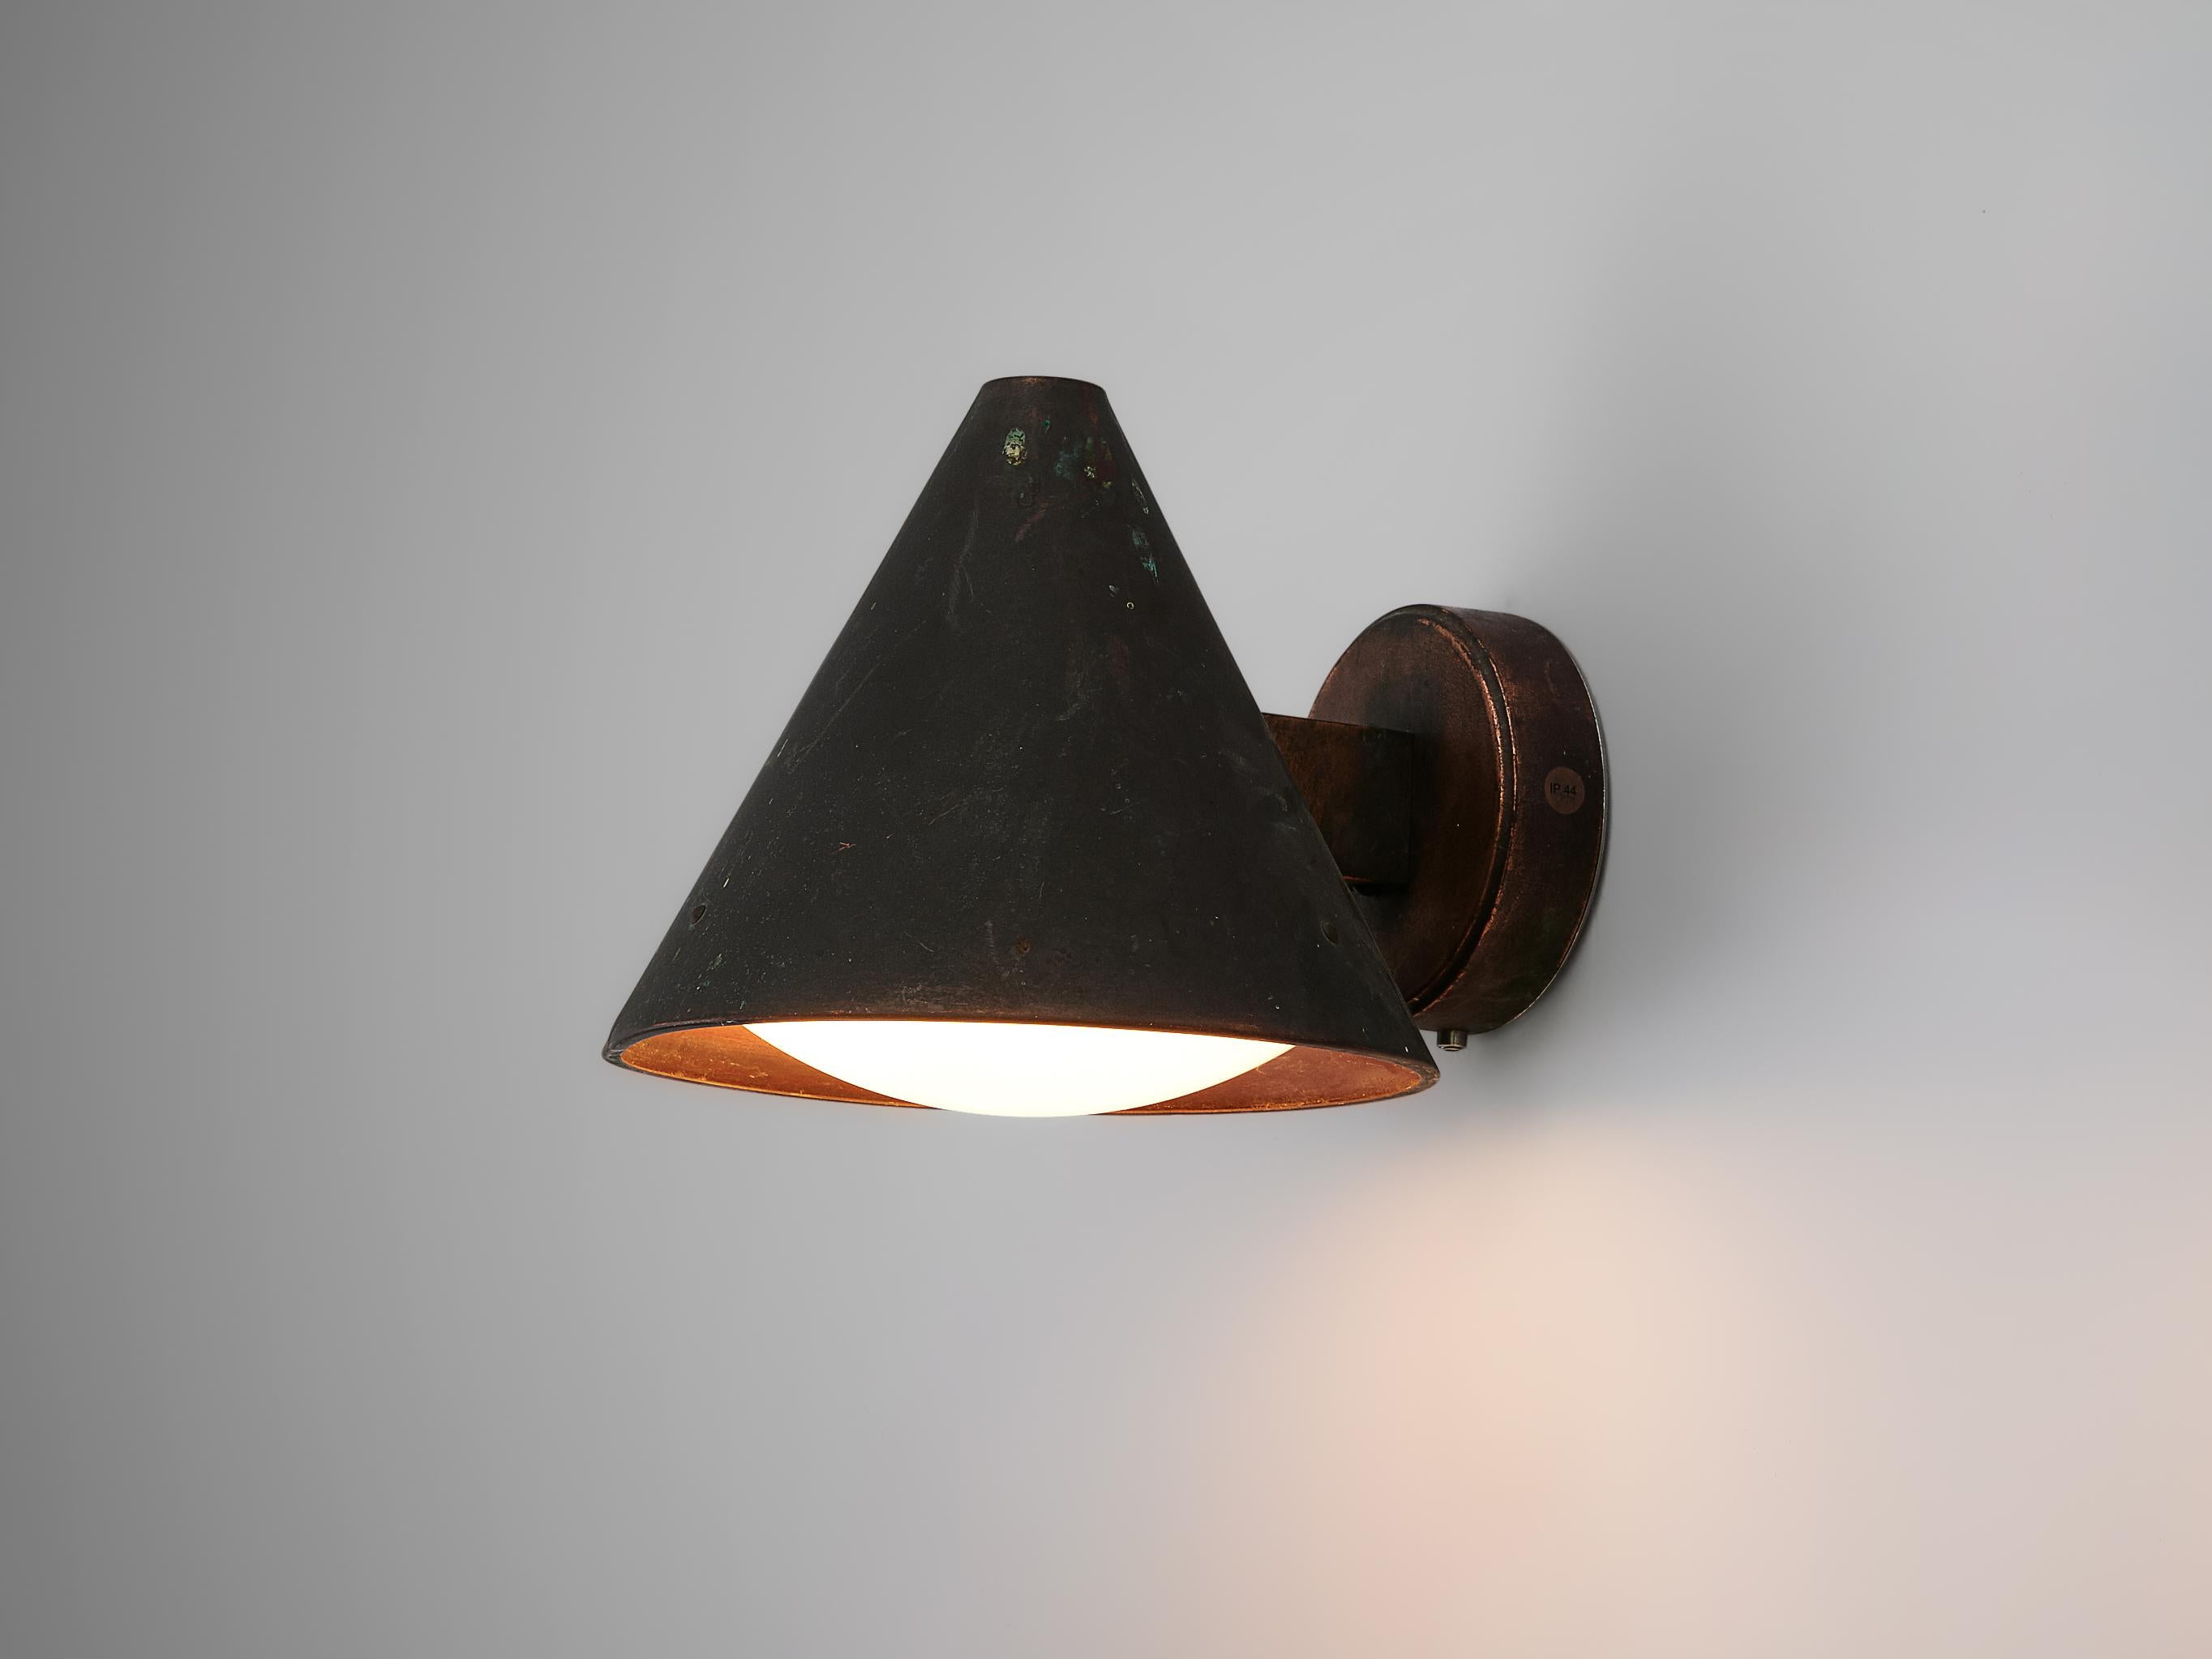 Wall light, copper, opaline glass, Scandinavia, 1950s

Cone-Shaped wall lamp in patinated copper. A round wall fixture with a short arm holds the lamp in place. The cone-shaped shade is made of copper that enriched with patina over time. A rounded